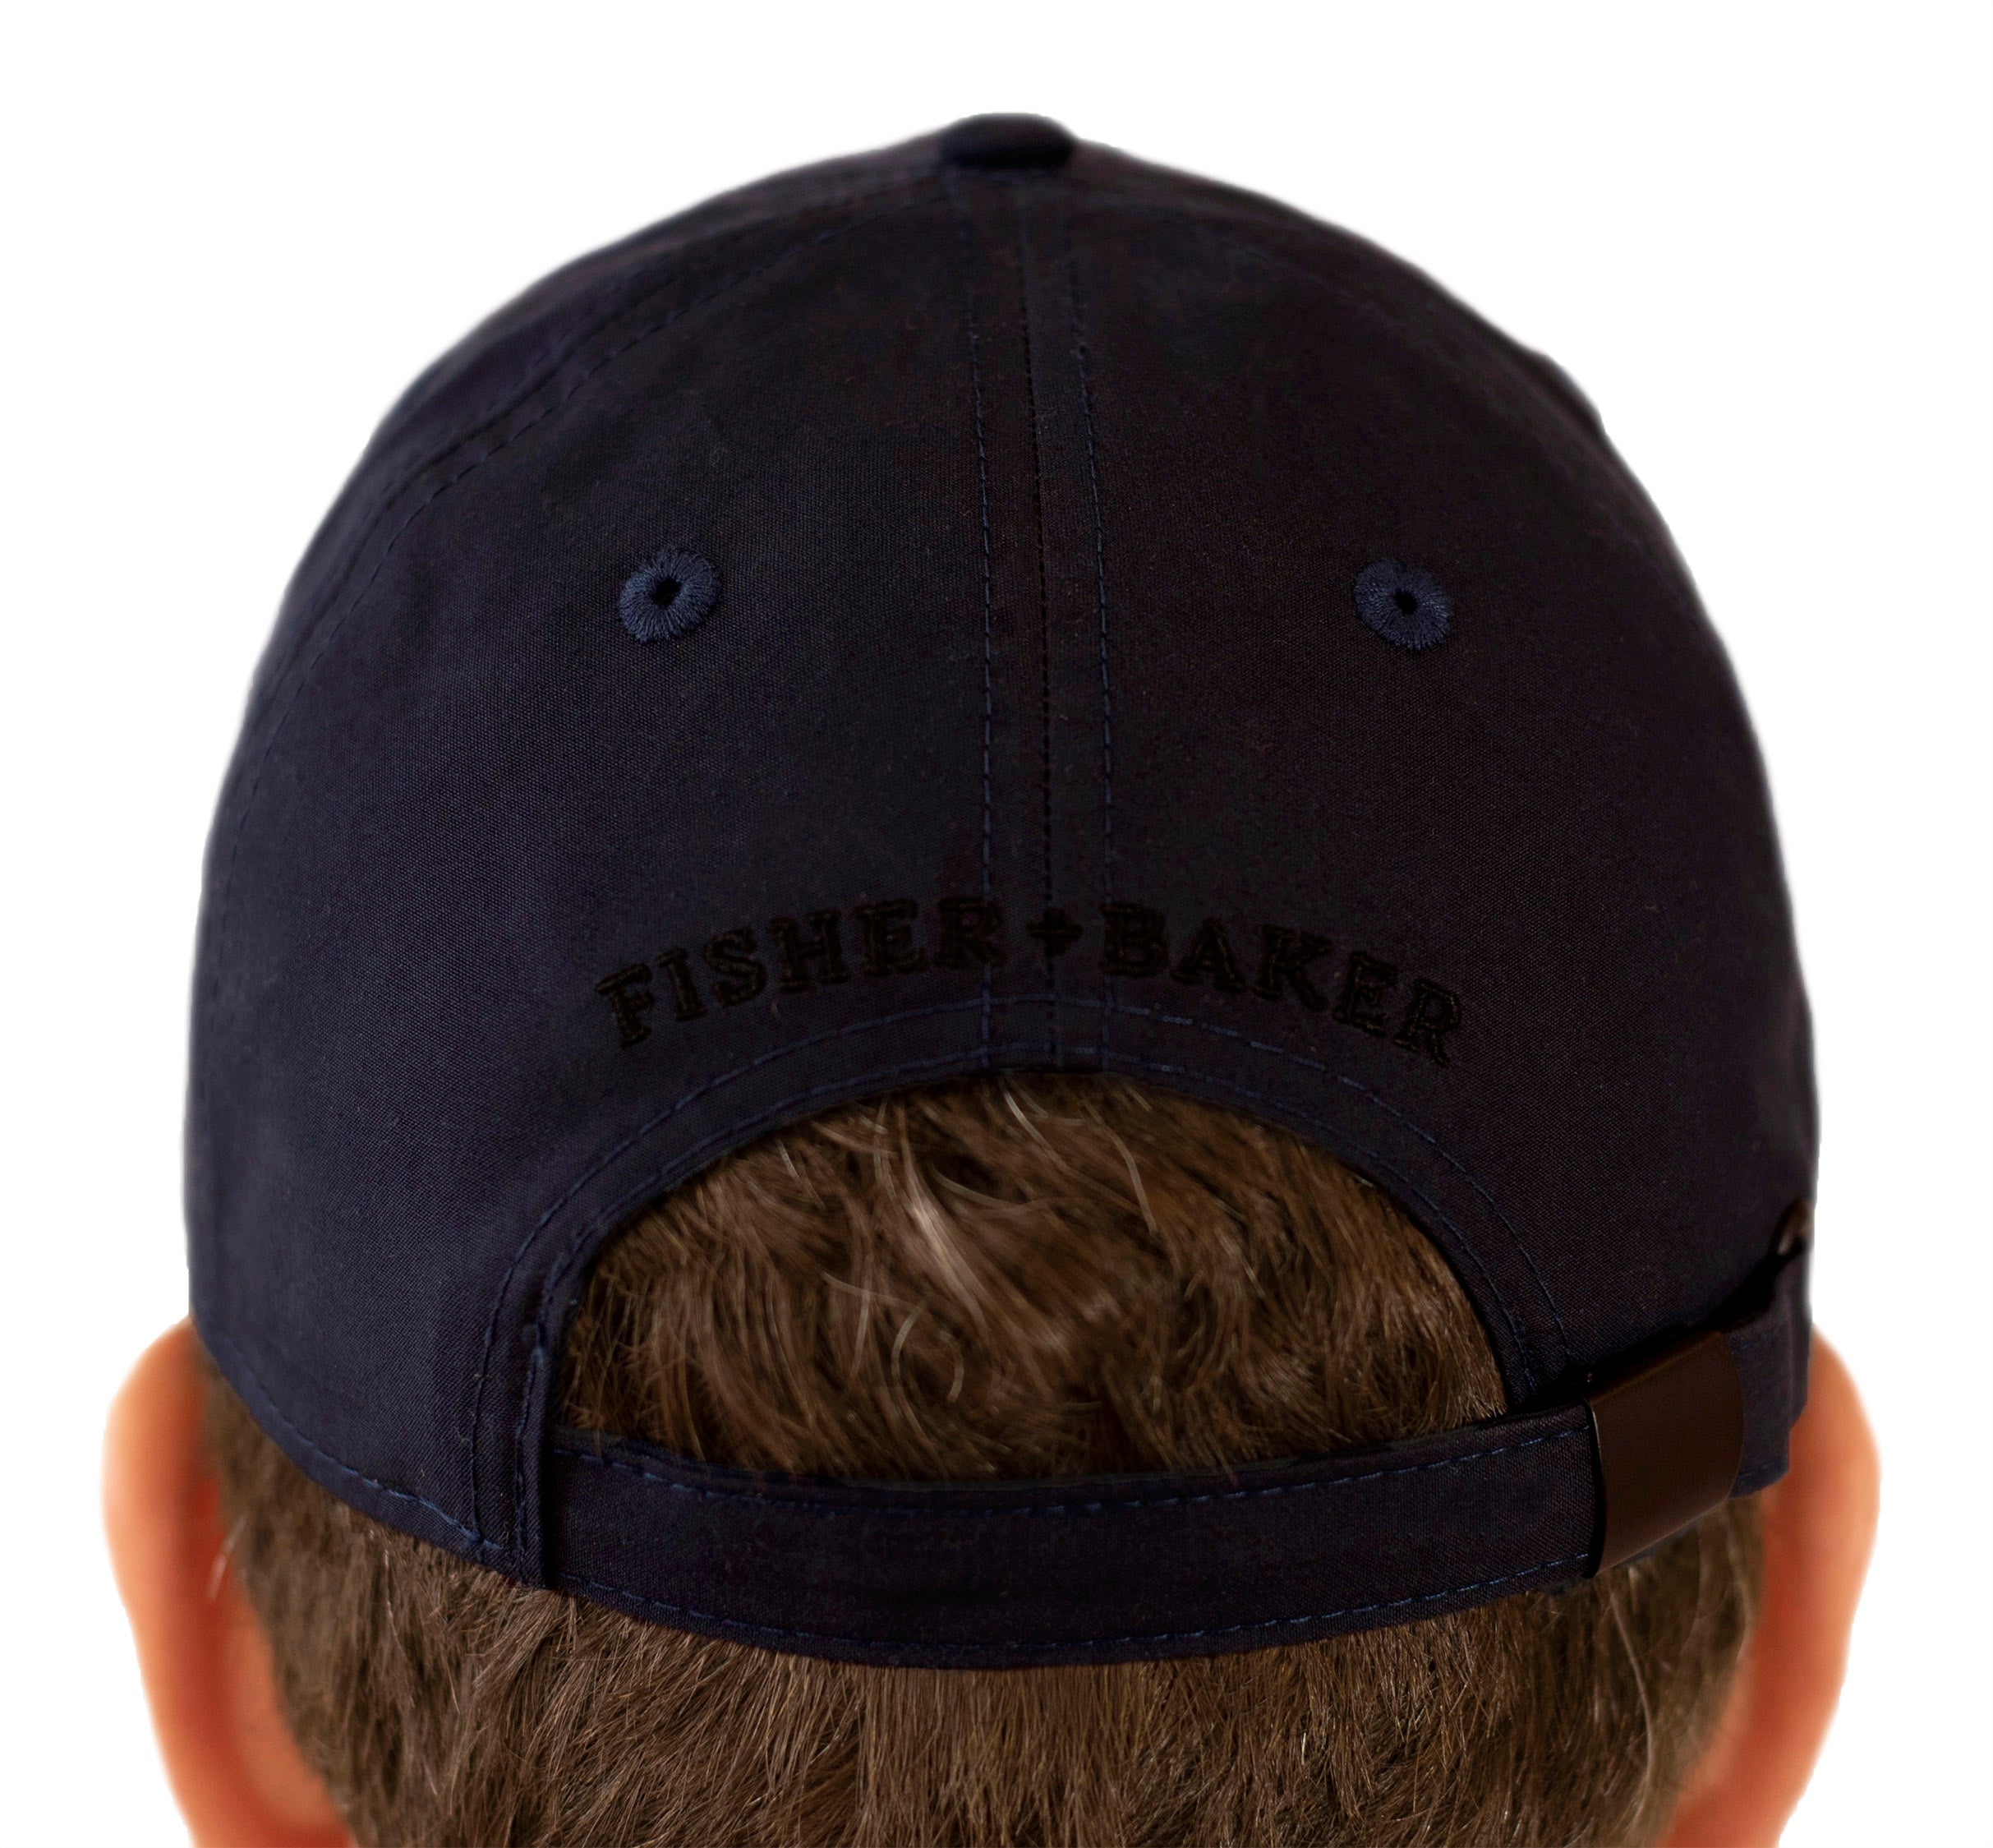 Fisher + Baker Men's Ventile Ball Cap made from soft waterproof Ventile  cotton